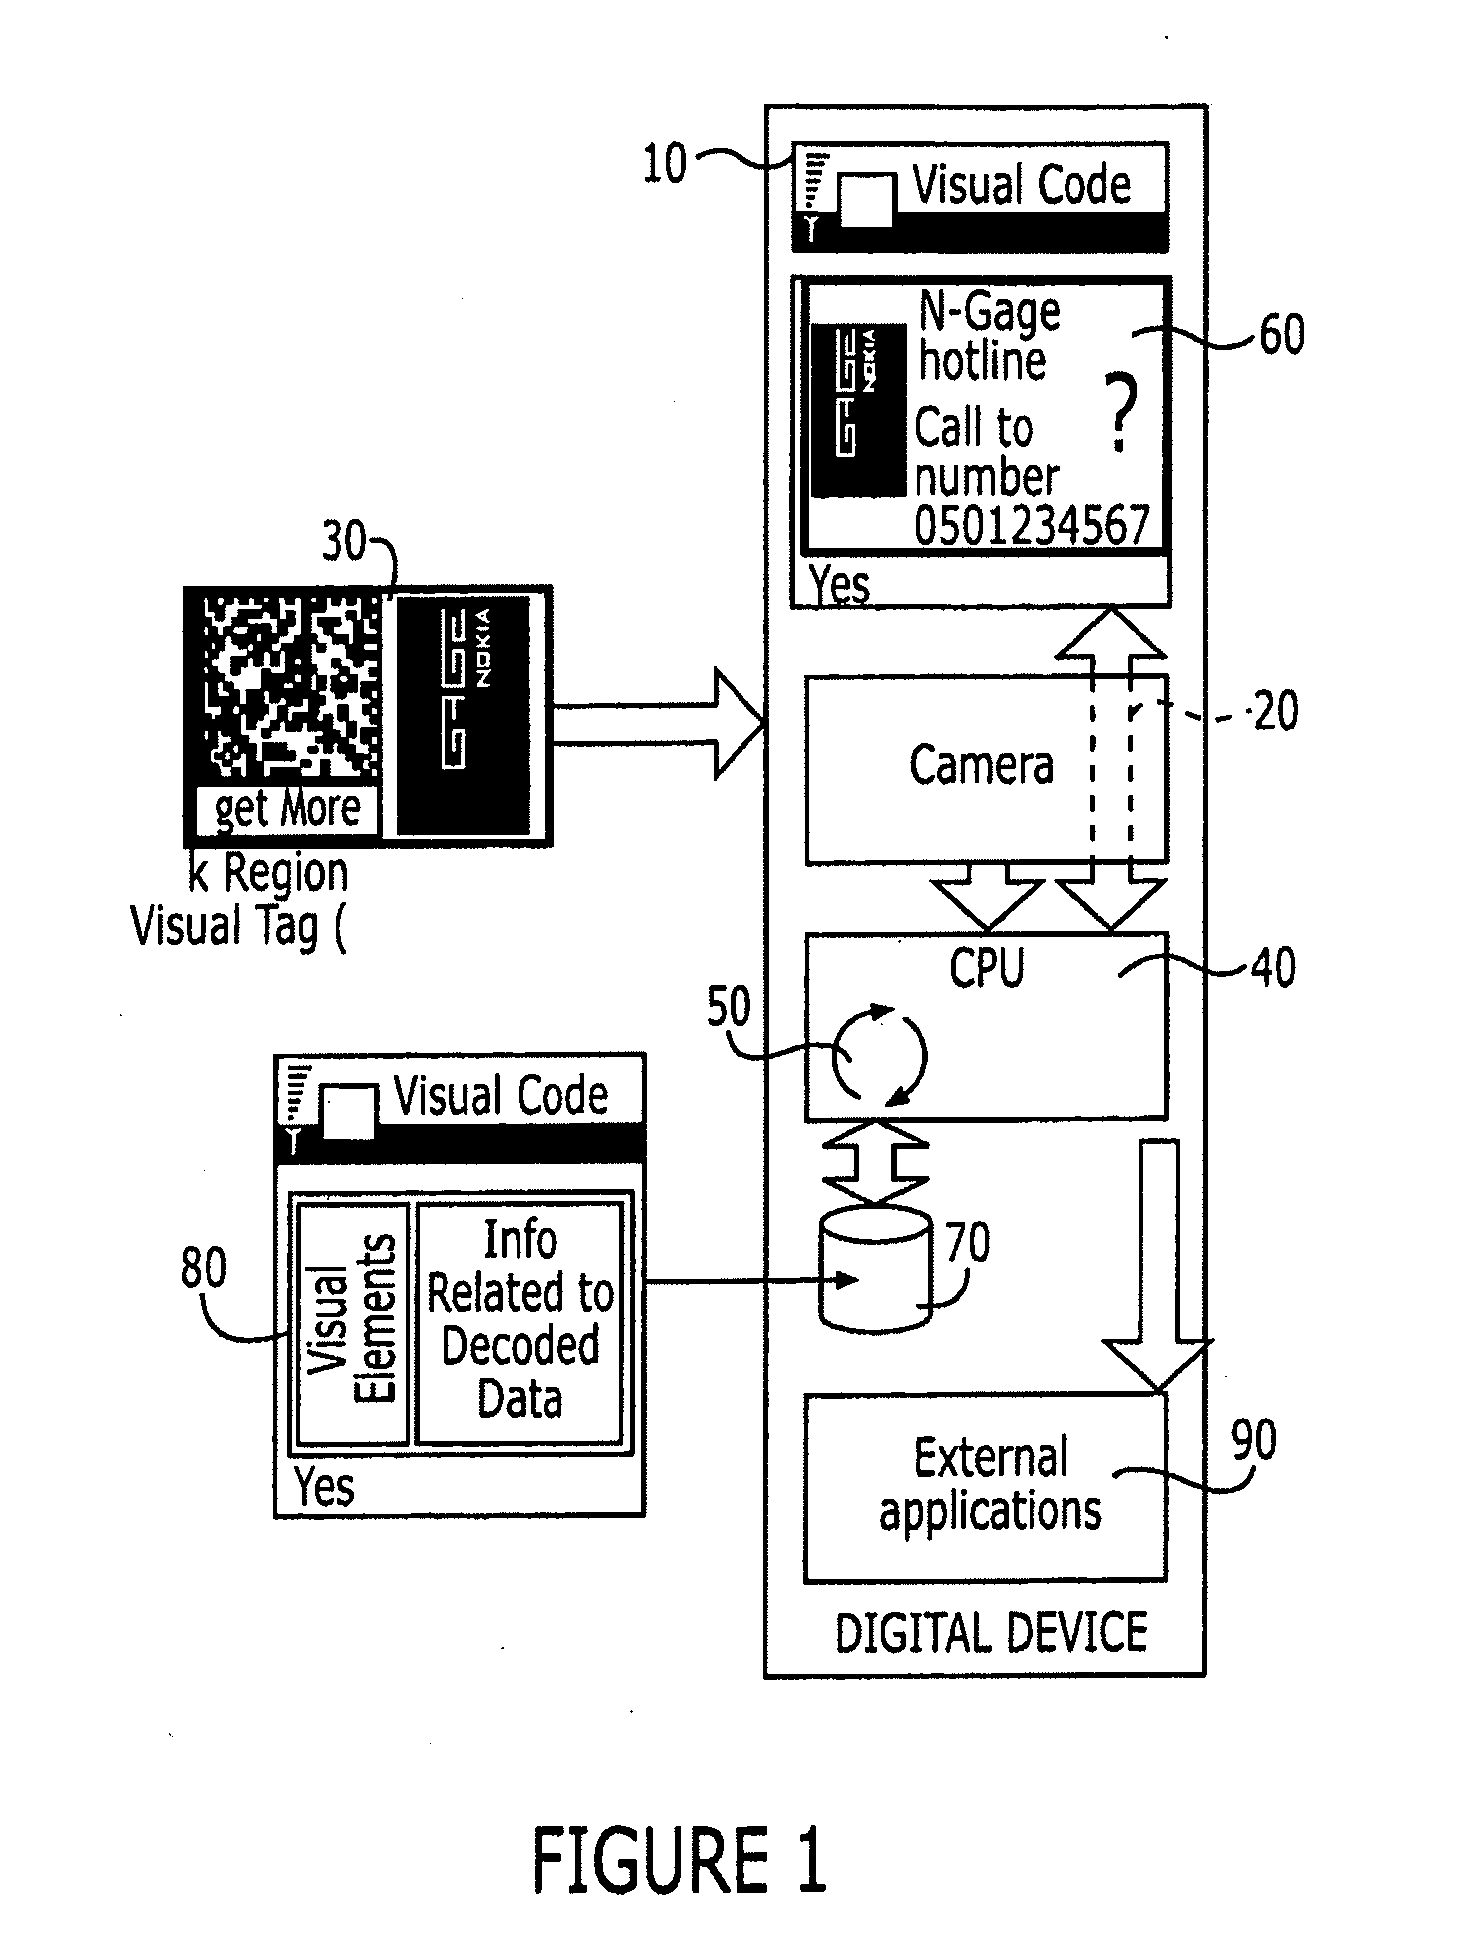 Methods, devices and computer program products for capture and display of visually encoded data and an image